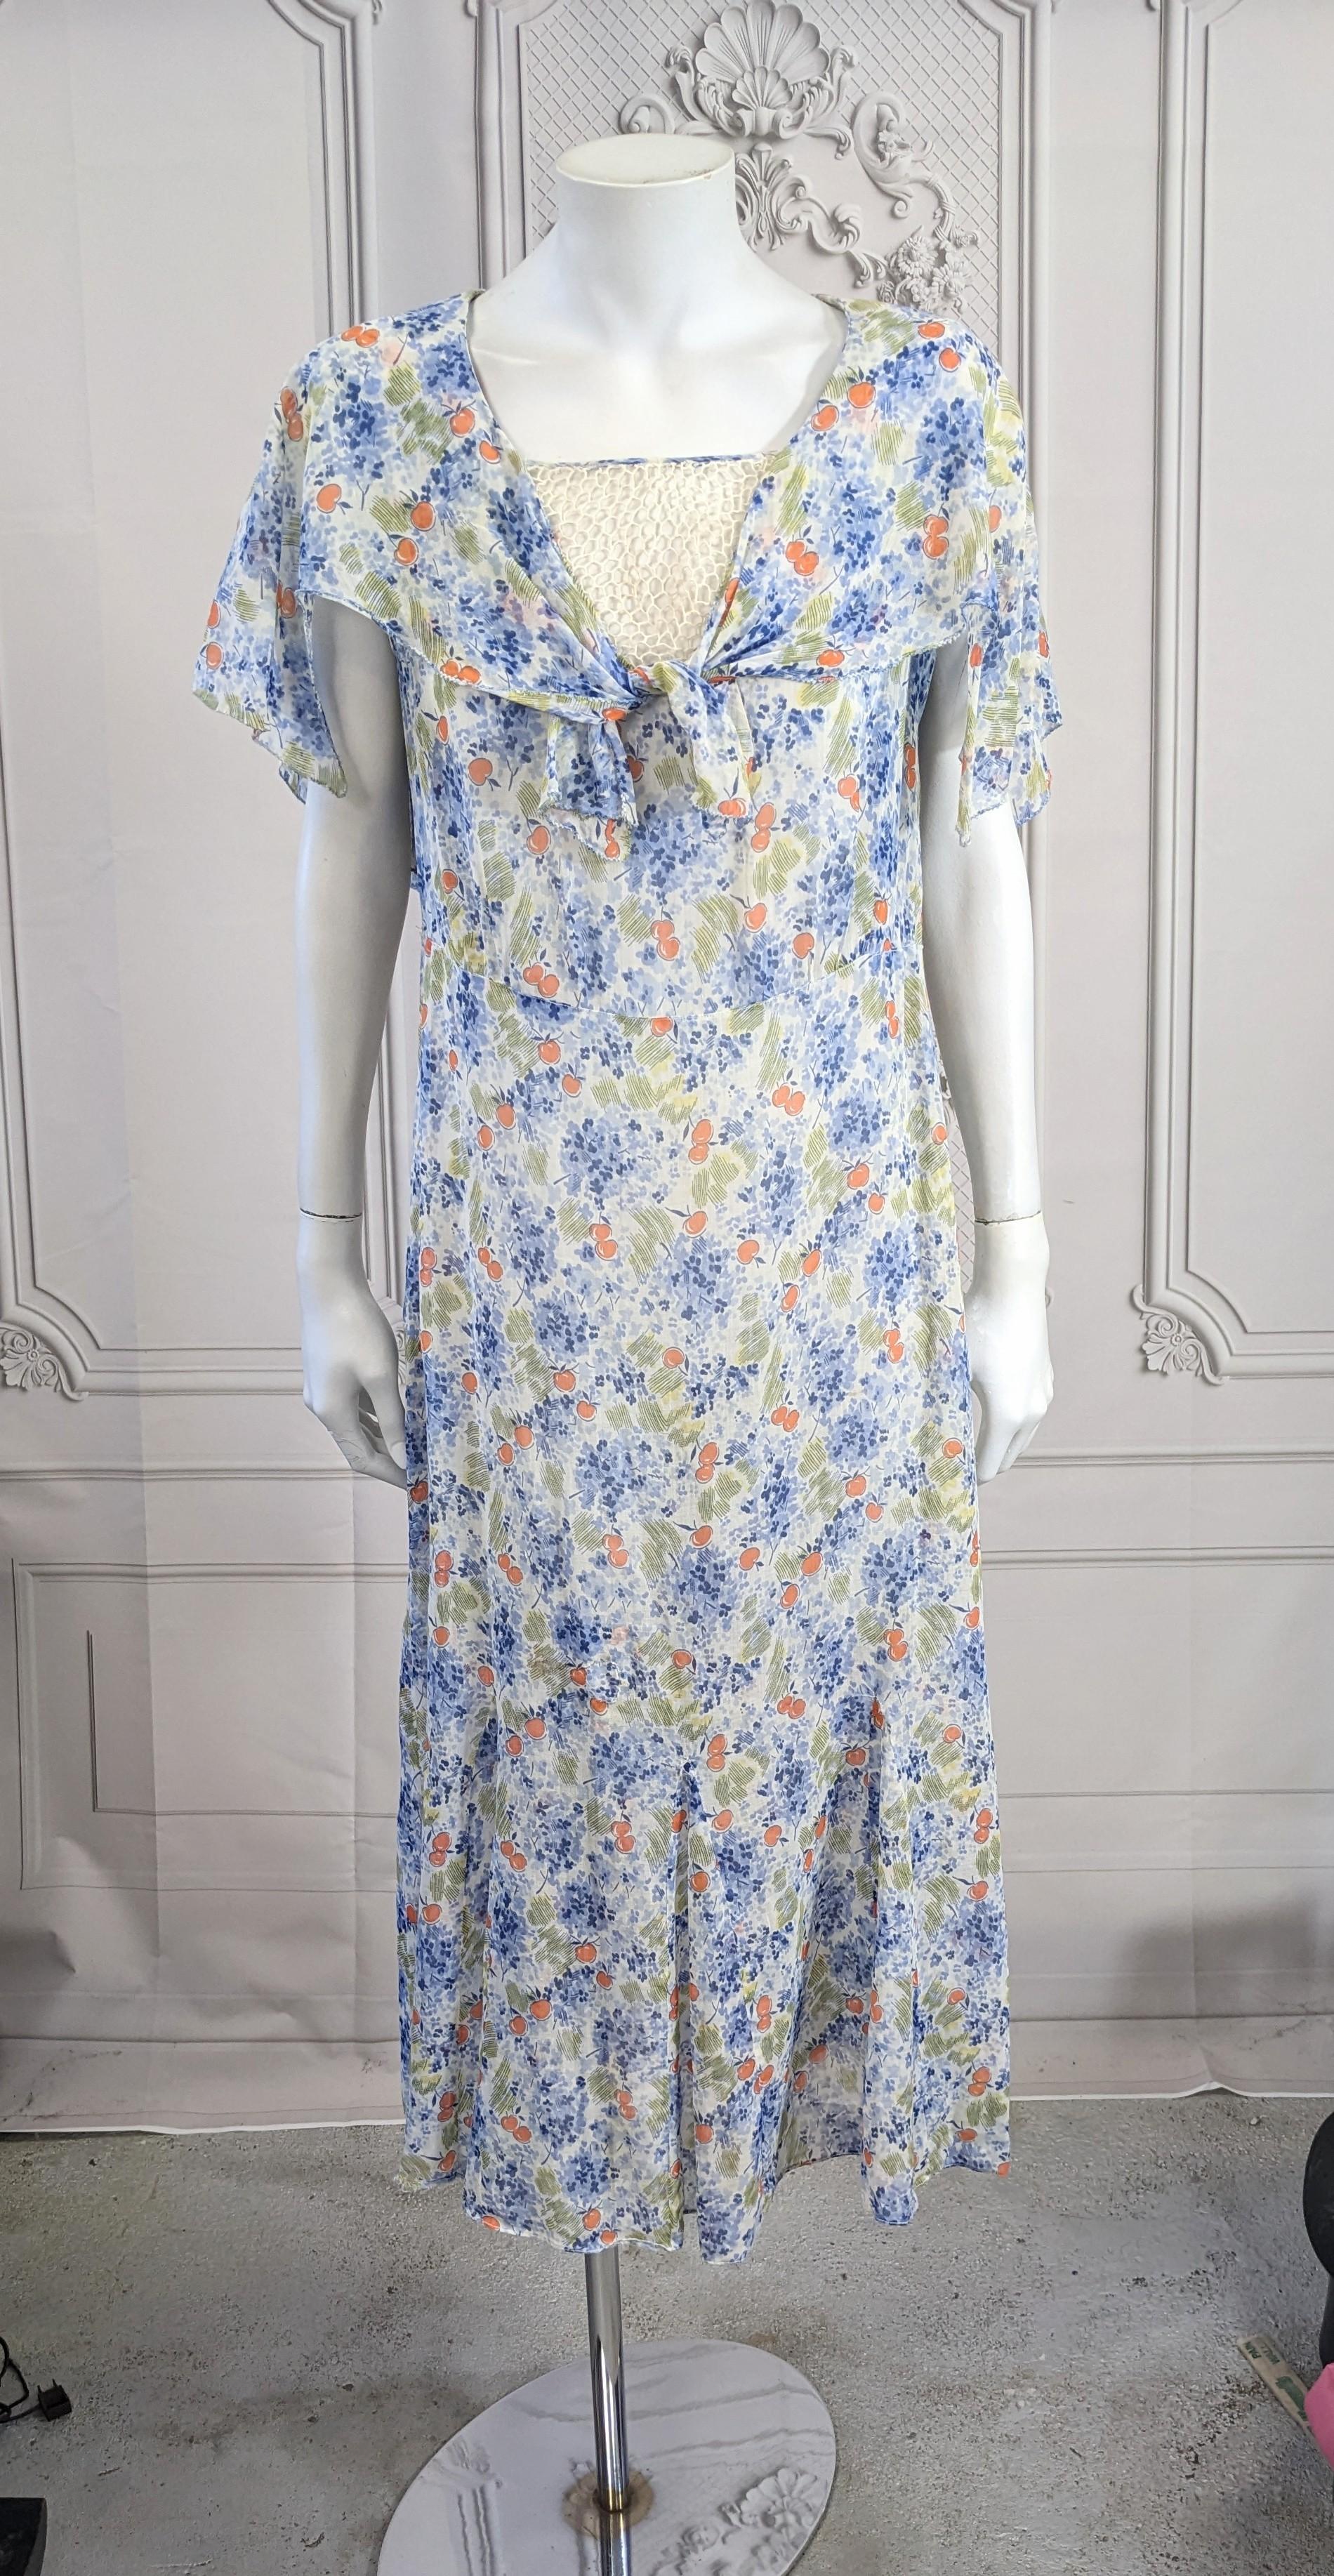 1930's Art Deco Cotton Cherry Print Day Dress with floaty capelet collar thats tied at front. A lace modesty panel is inserted at neckline, but can be removed if preferred. Charming print of orange cherries on blue-green cotton muslin ground. Side